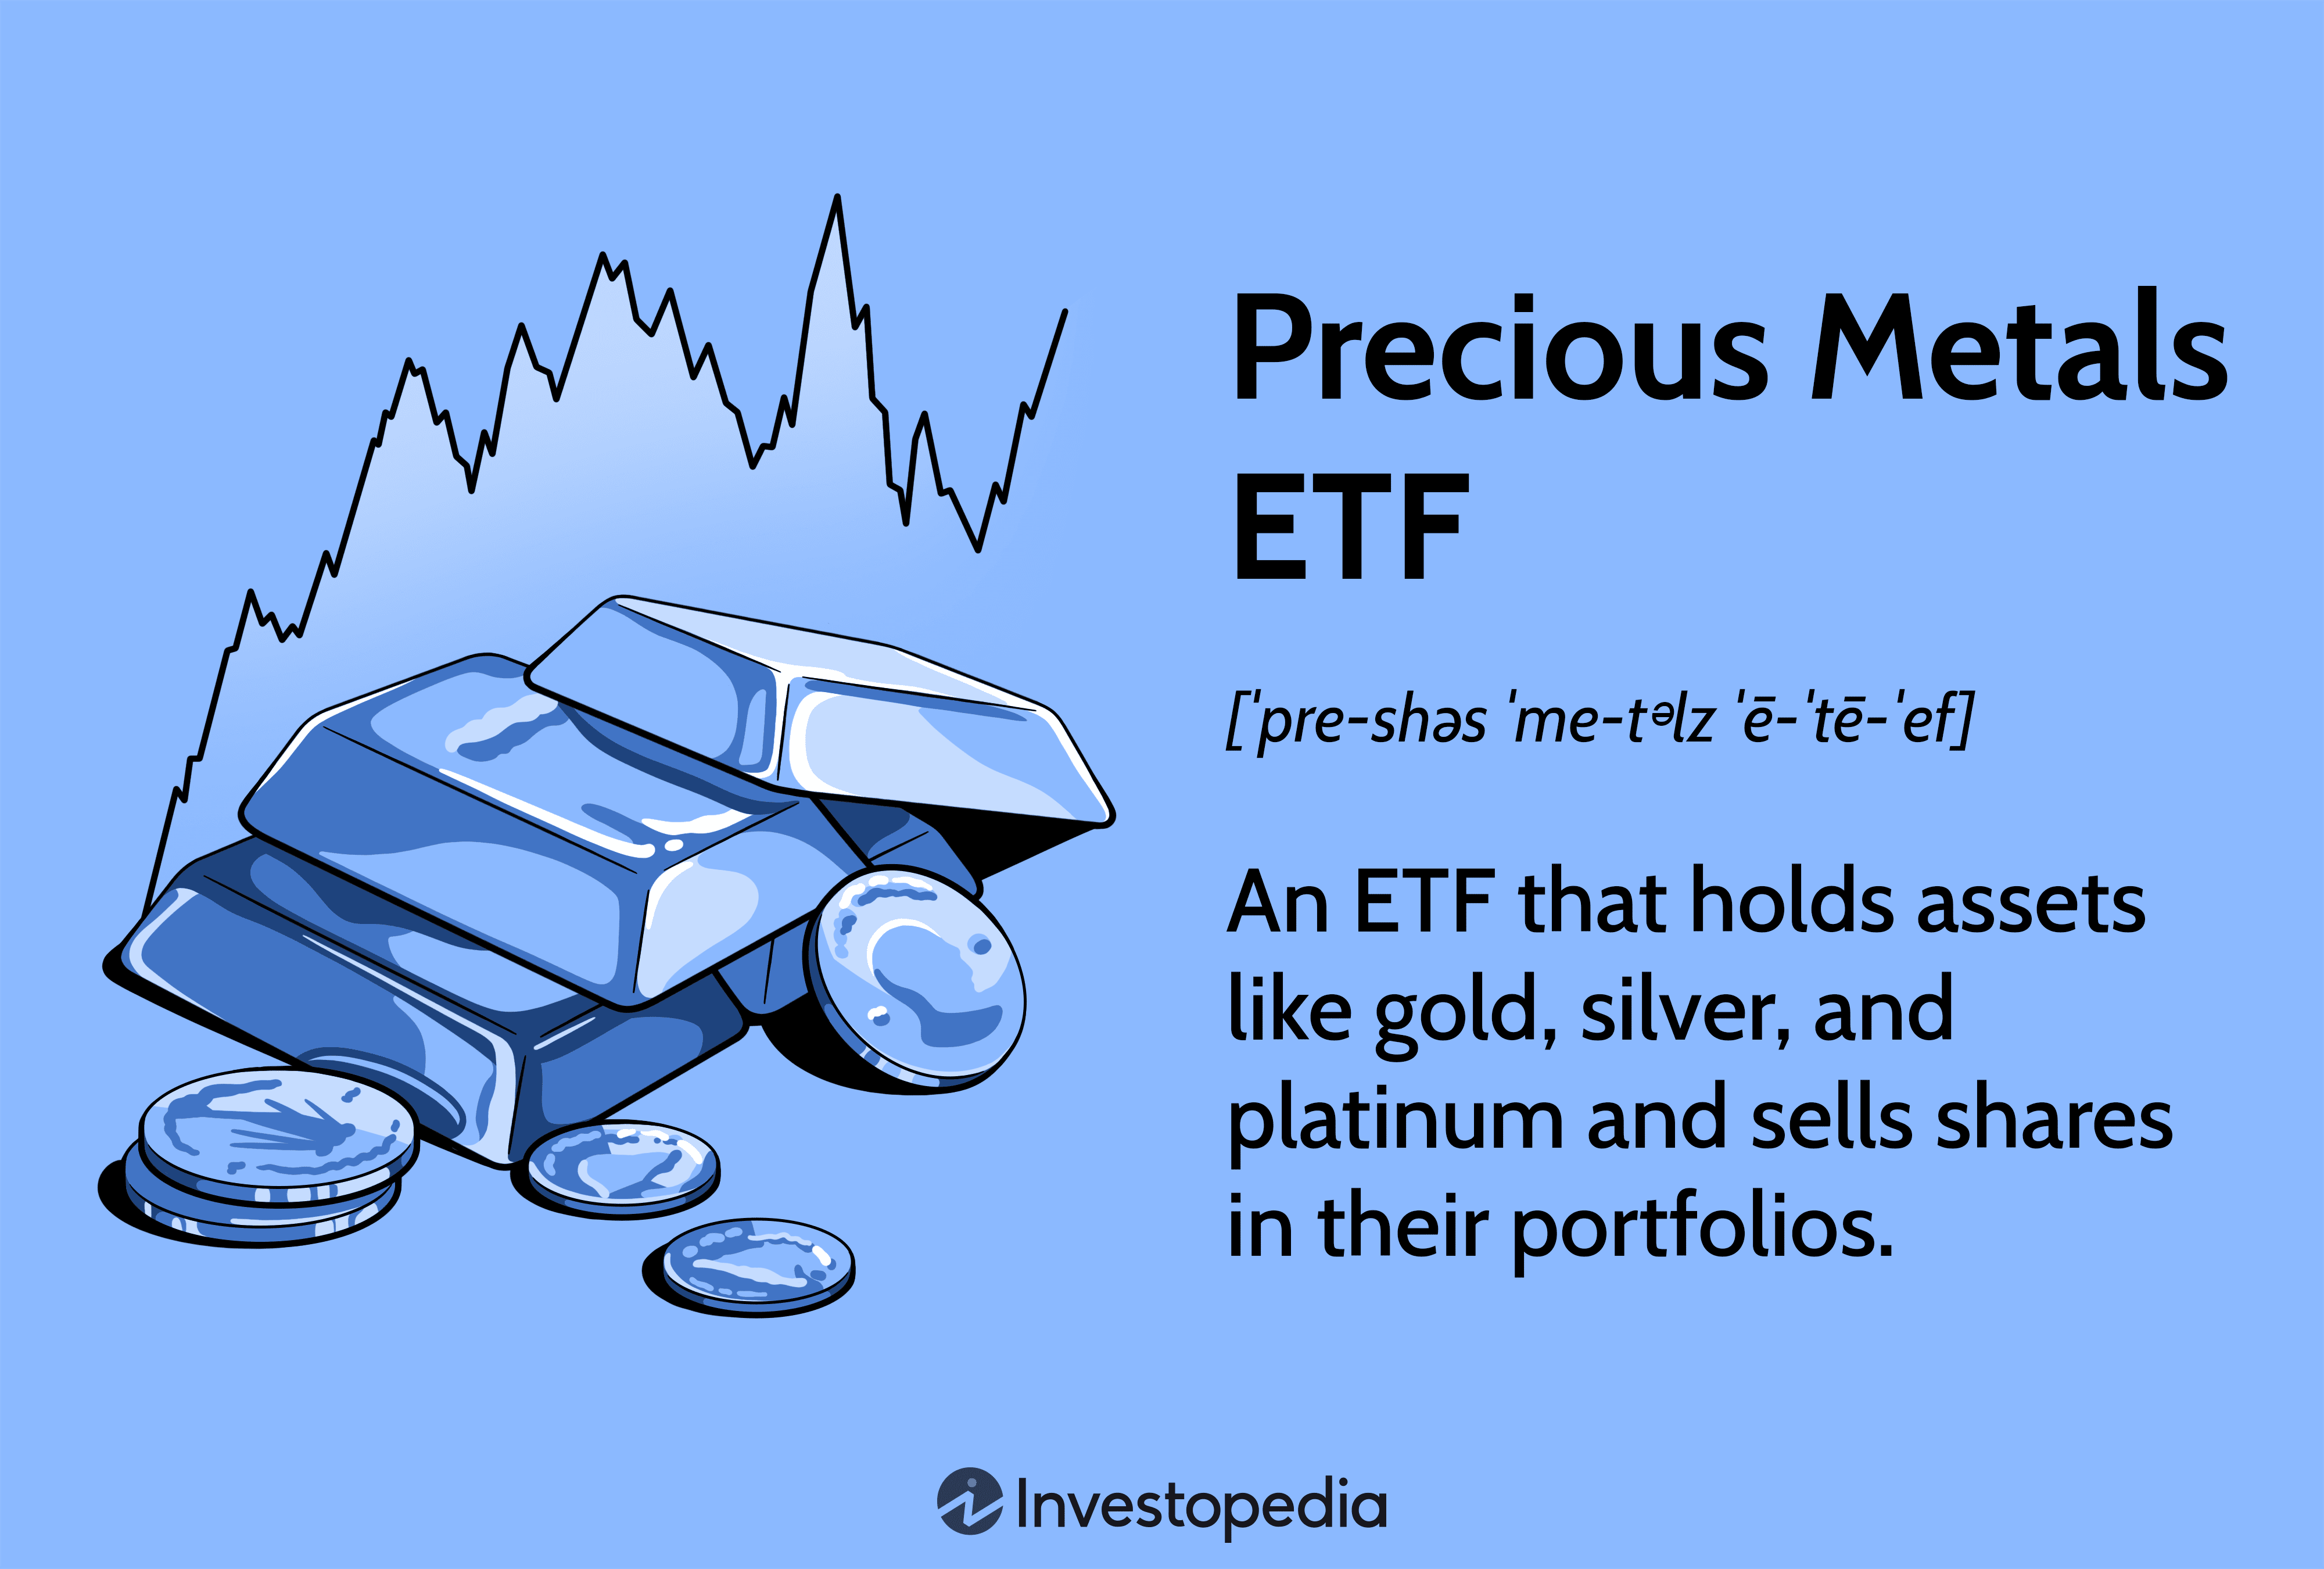 Precious Metals ETFs: An ETF that holds assets like gold, silver, and platinum and sell shares in their portfolios.